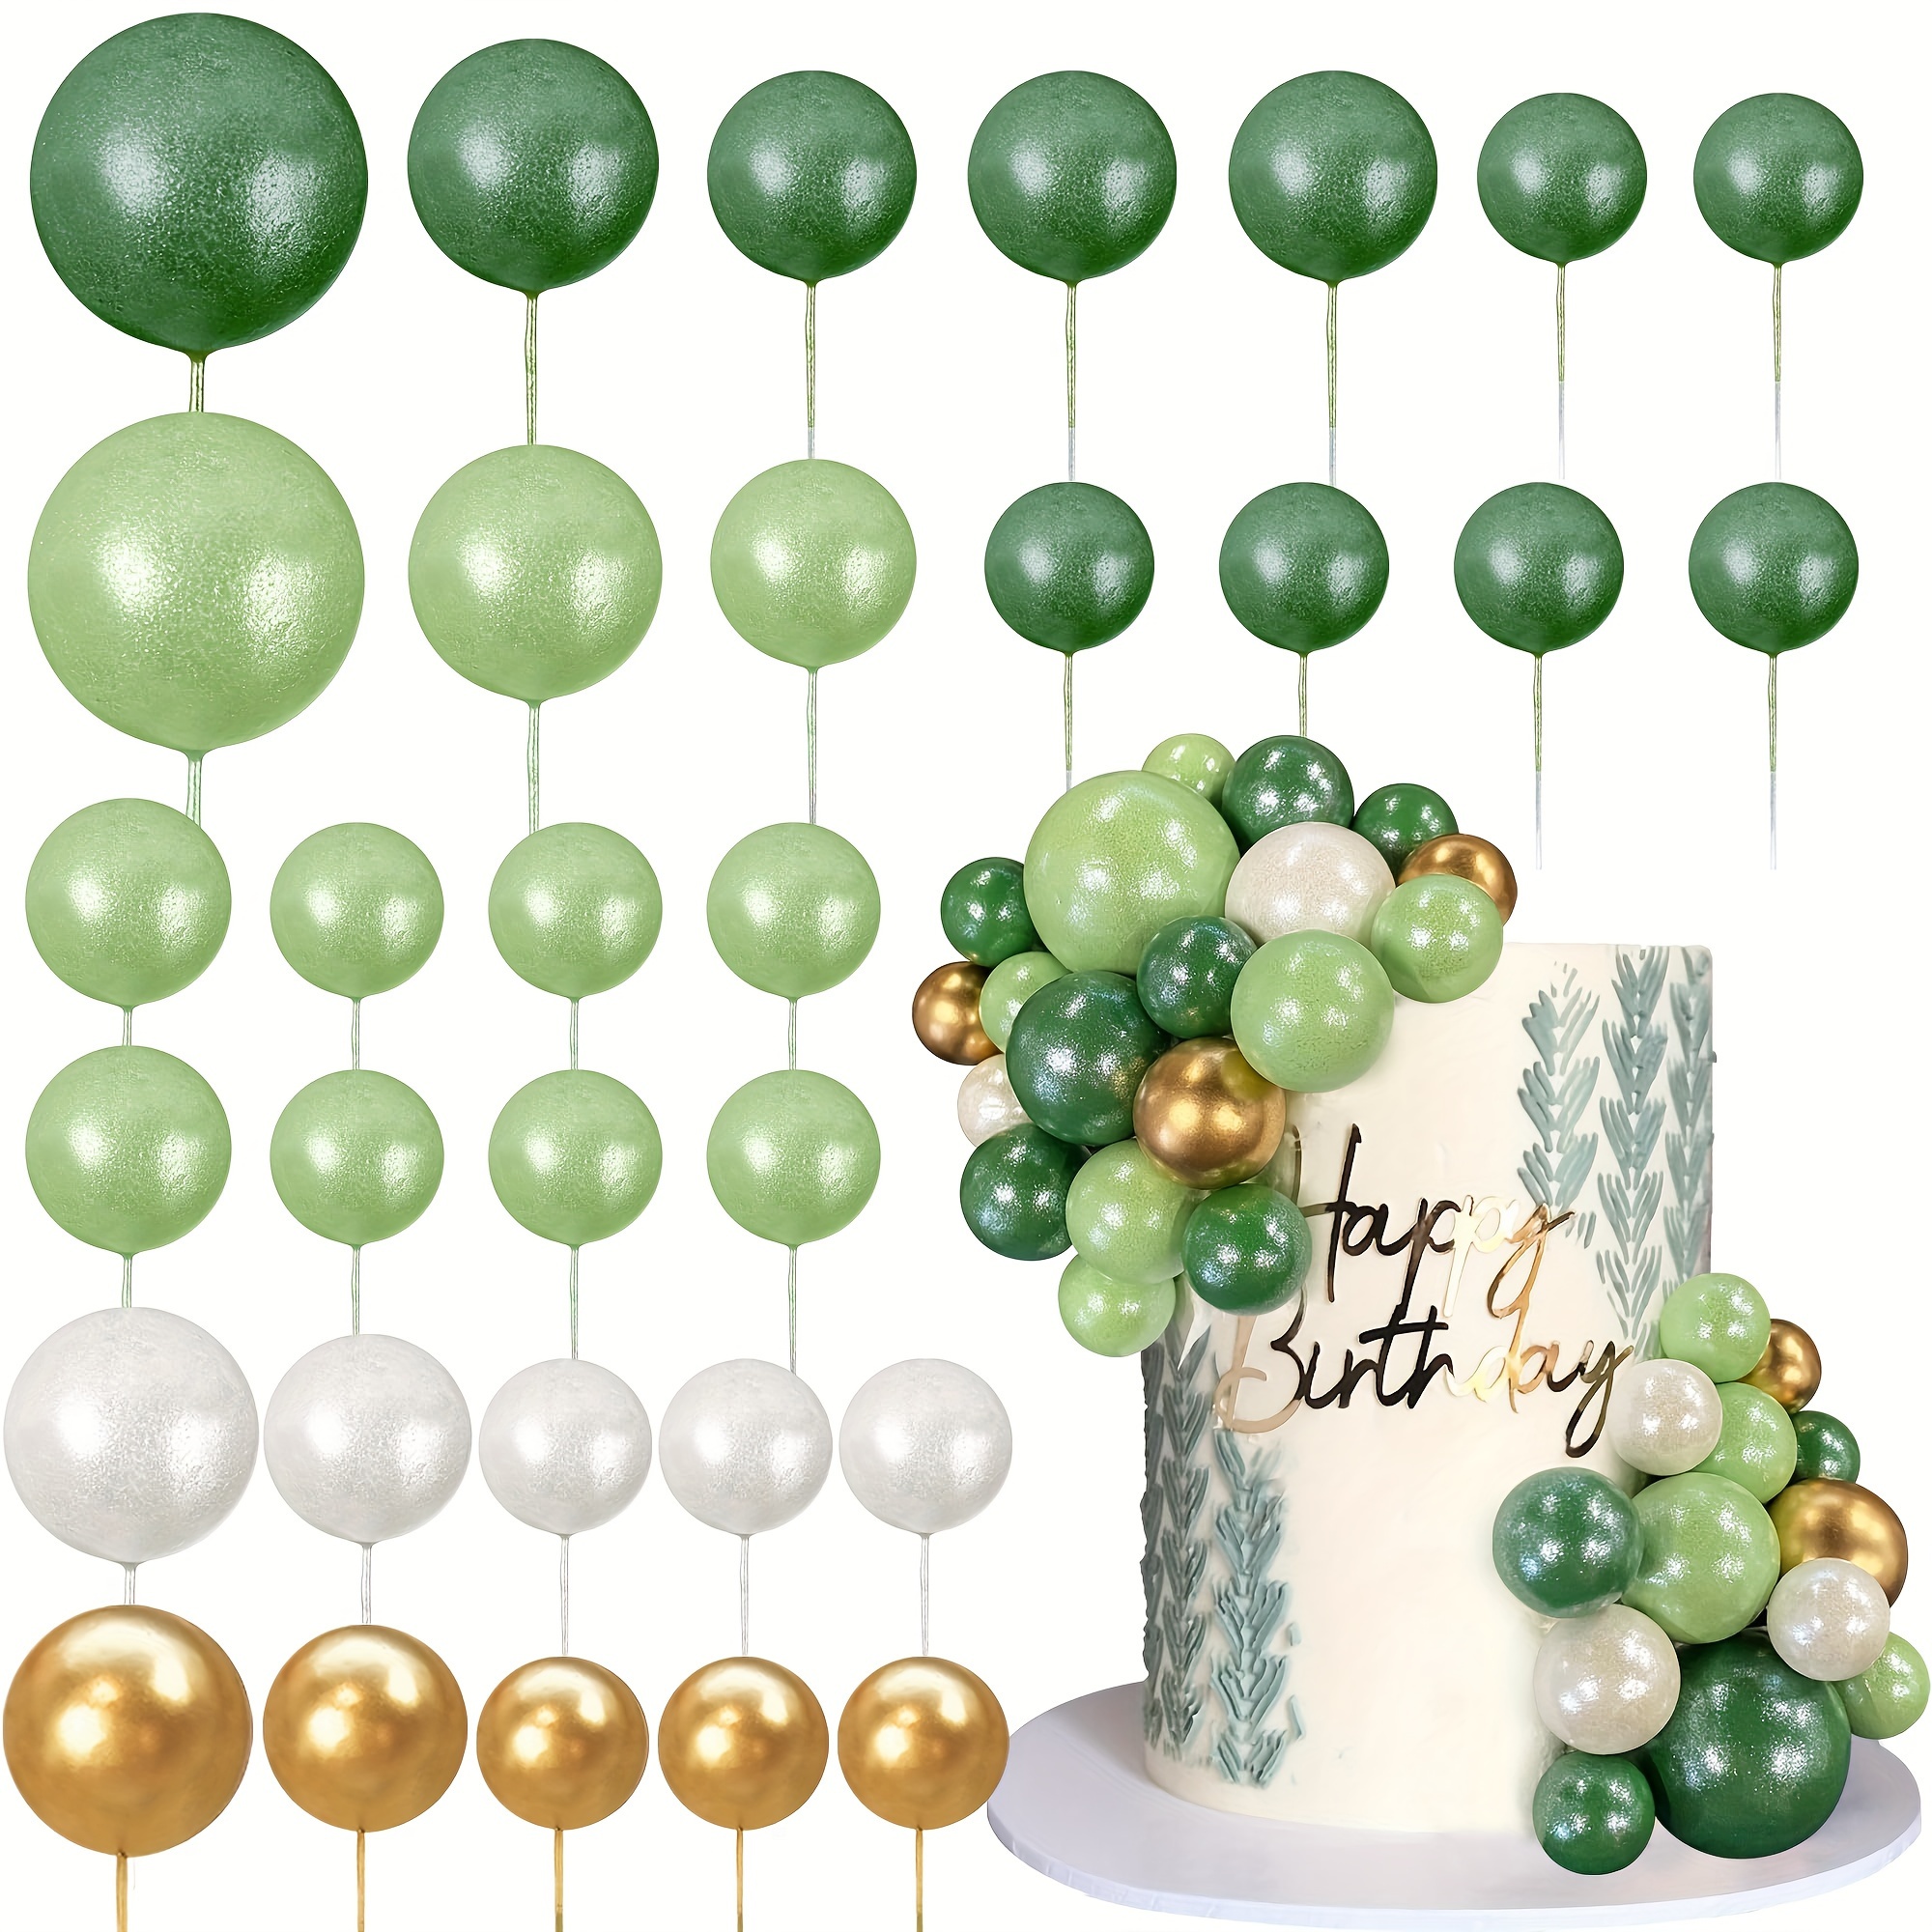 

Green, White & Gold Cake Topper Kit - Plastic Pearl Ball Shaped Cupcake Picks For Birthday Party, Wedding Celebration, No Feathers, Electricity-free Cake Decorating Supplies